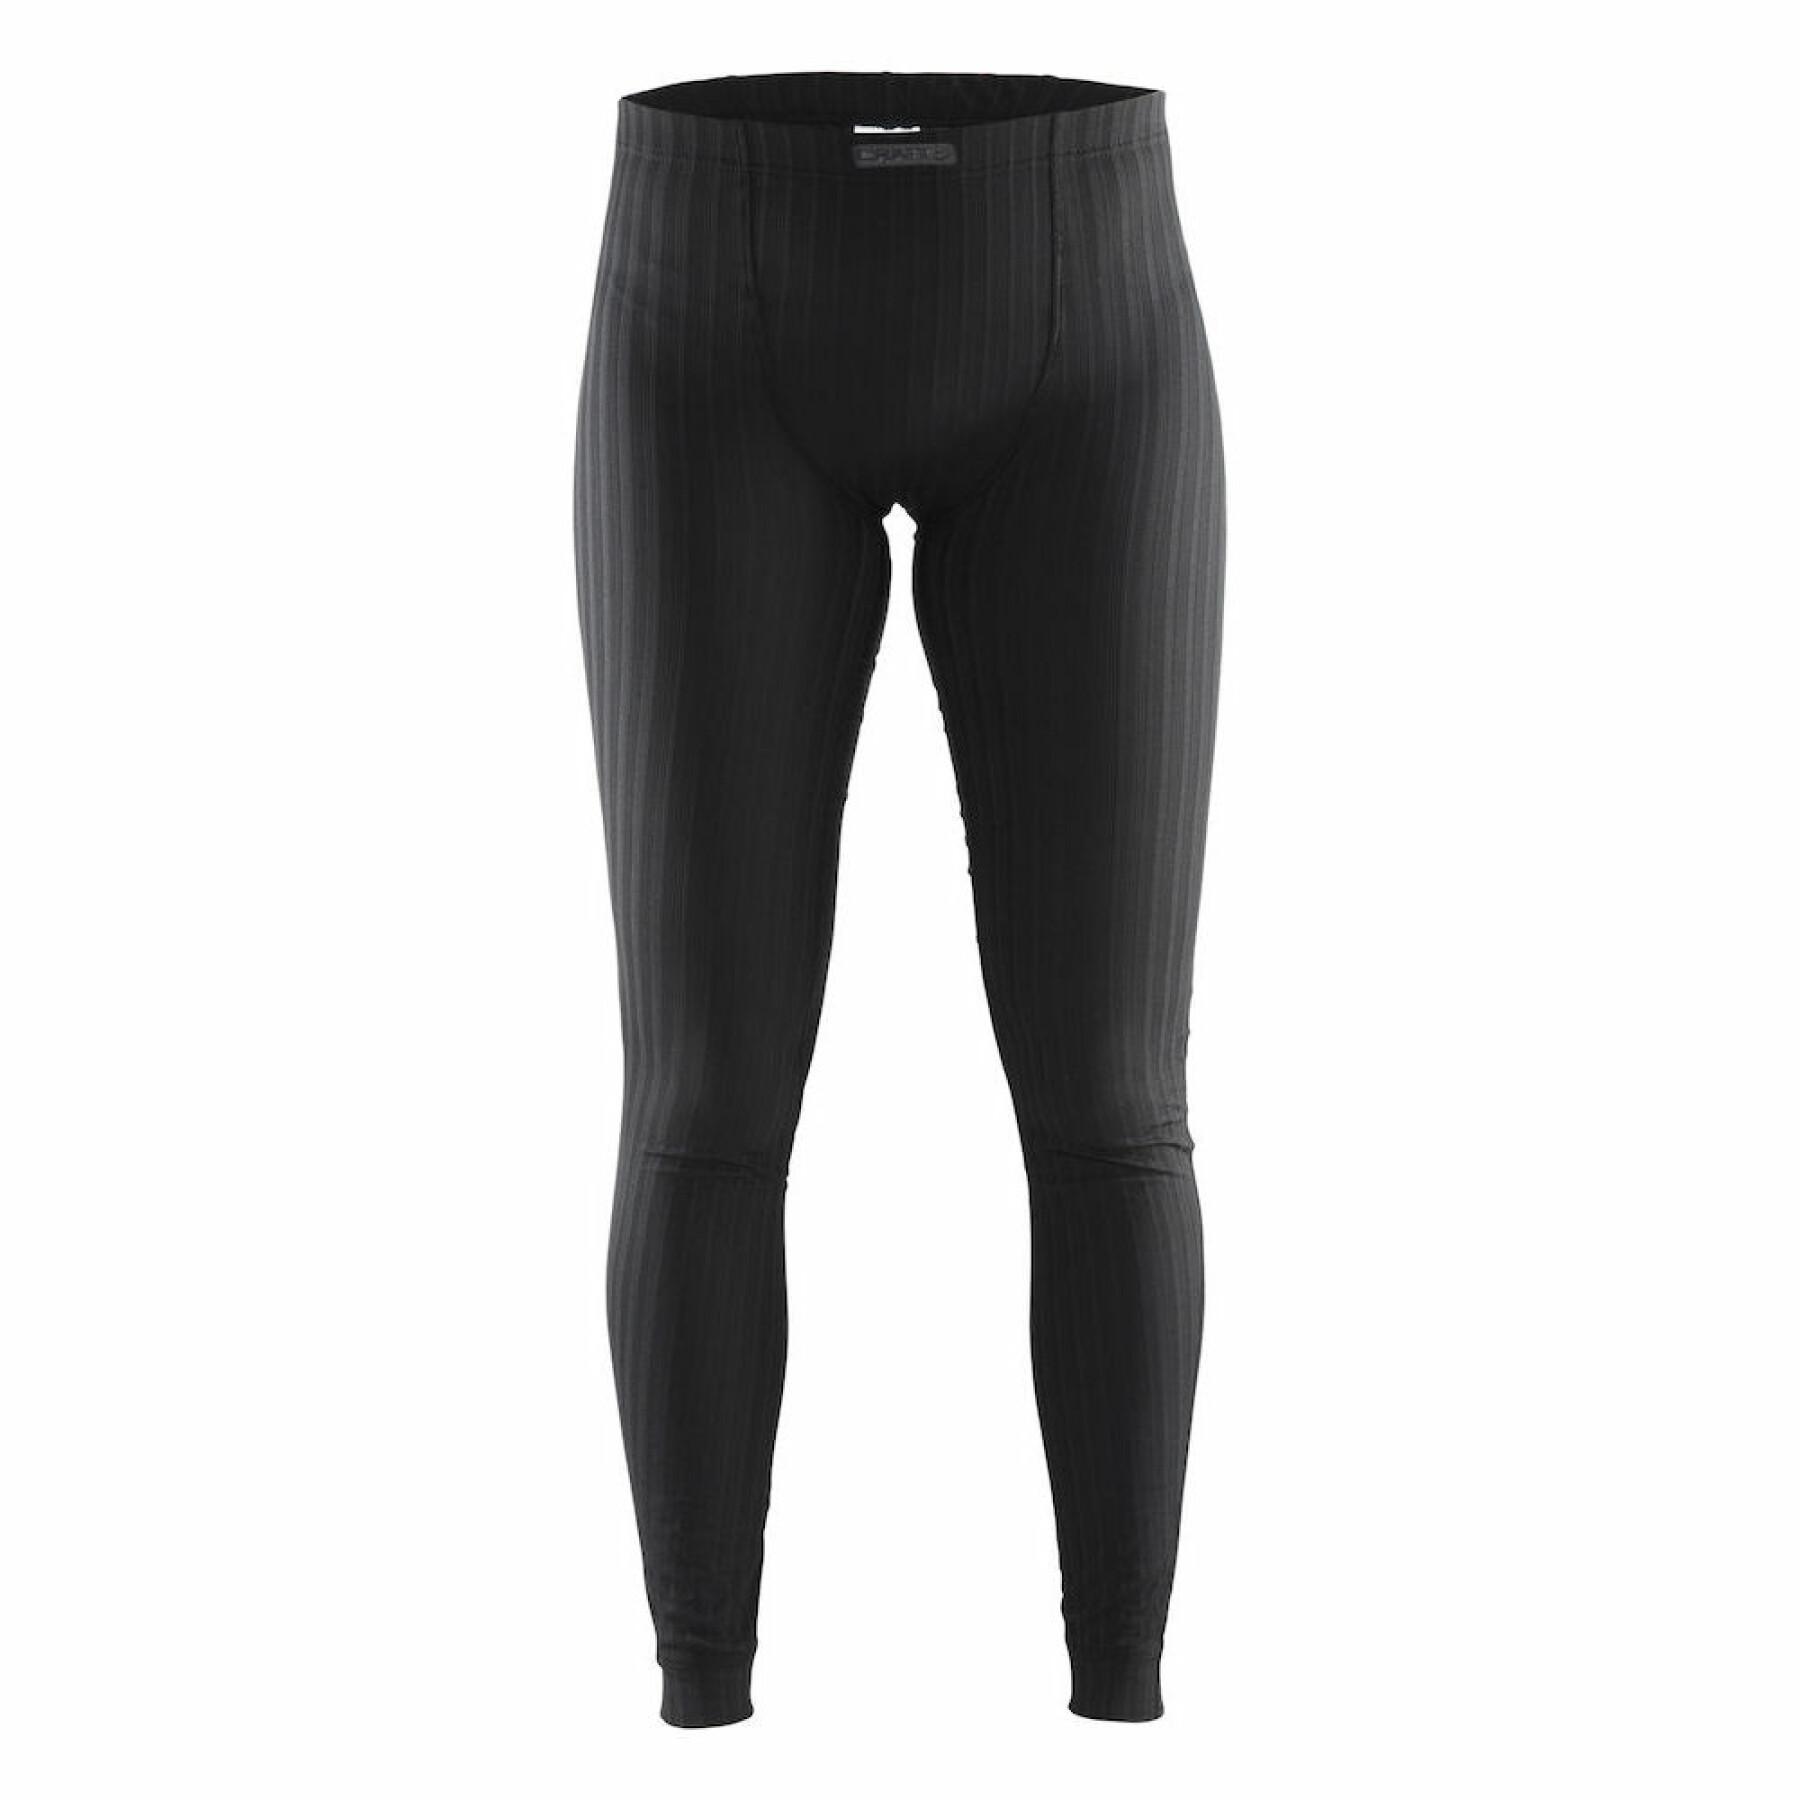 Women's tights Craft be active extreme 2.0